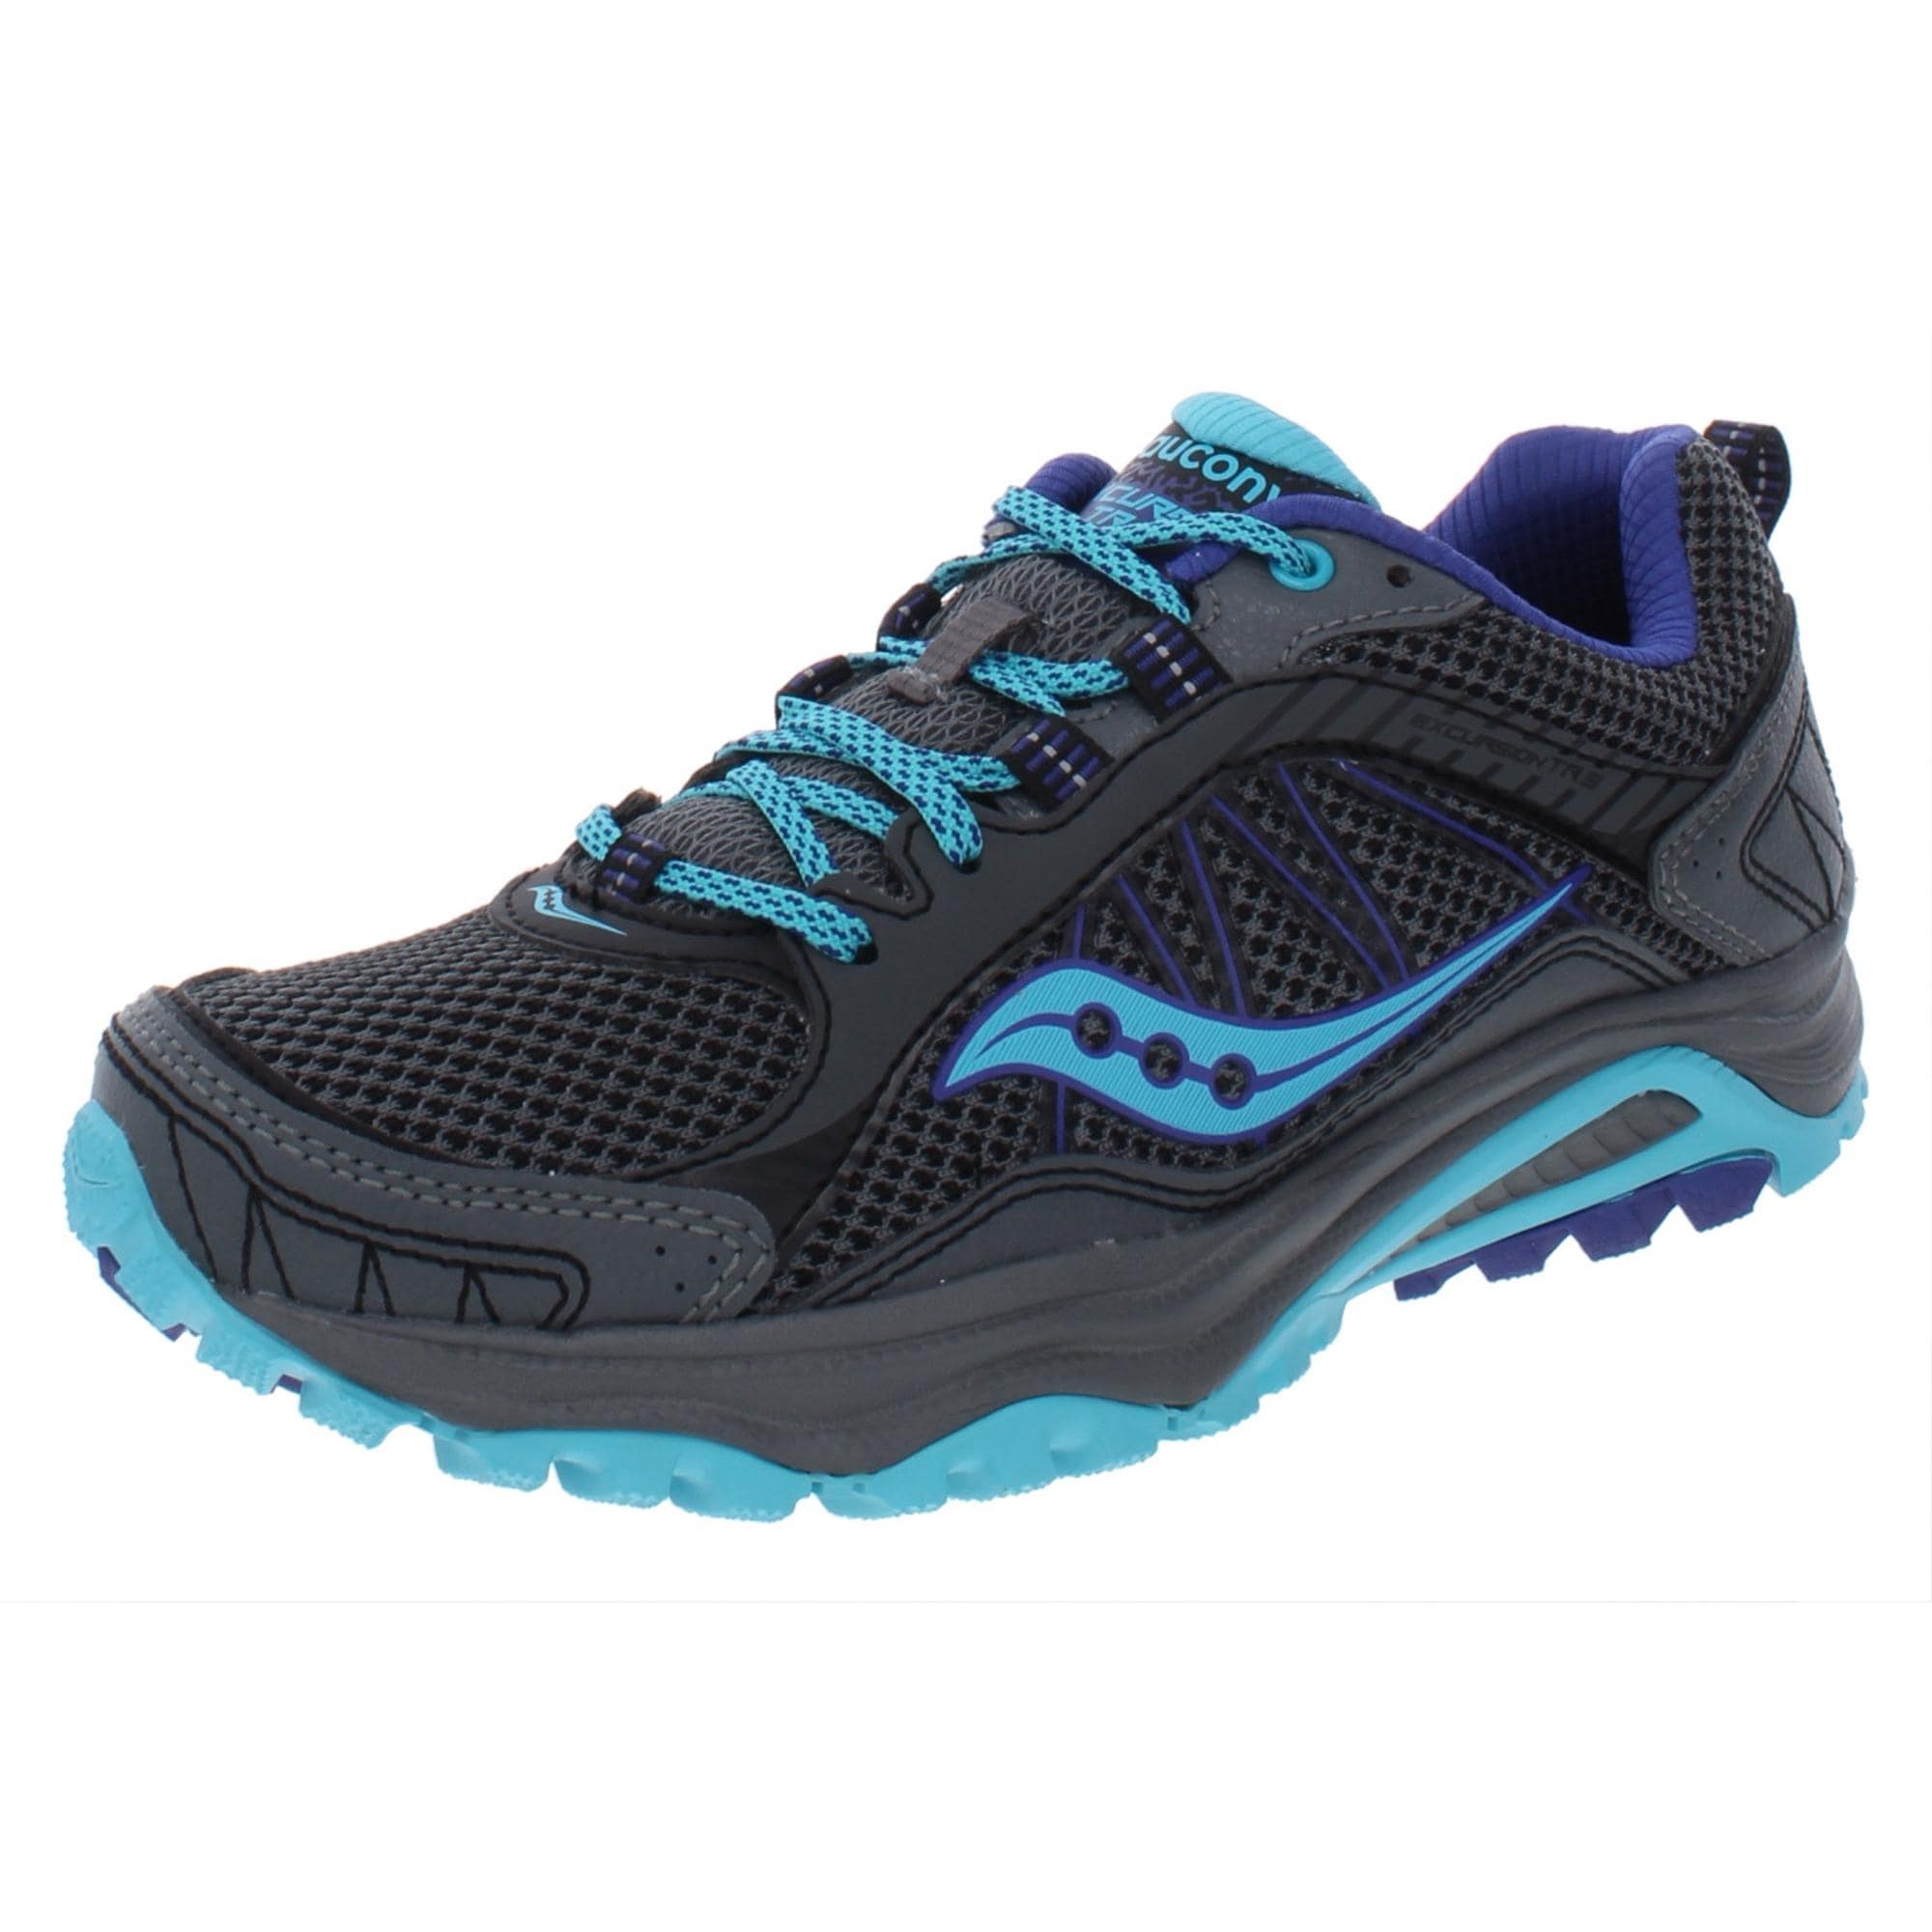 saucony women's grid excursion tr9 trail running shoe